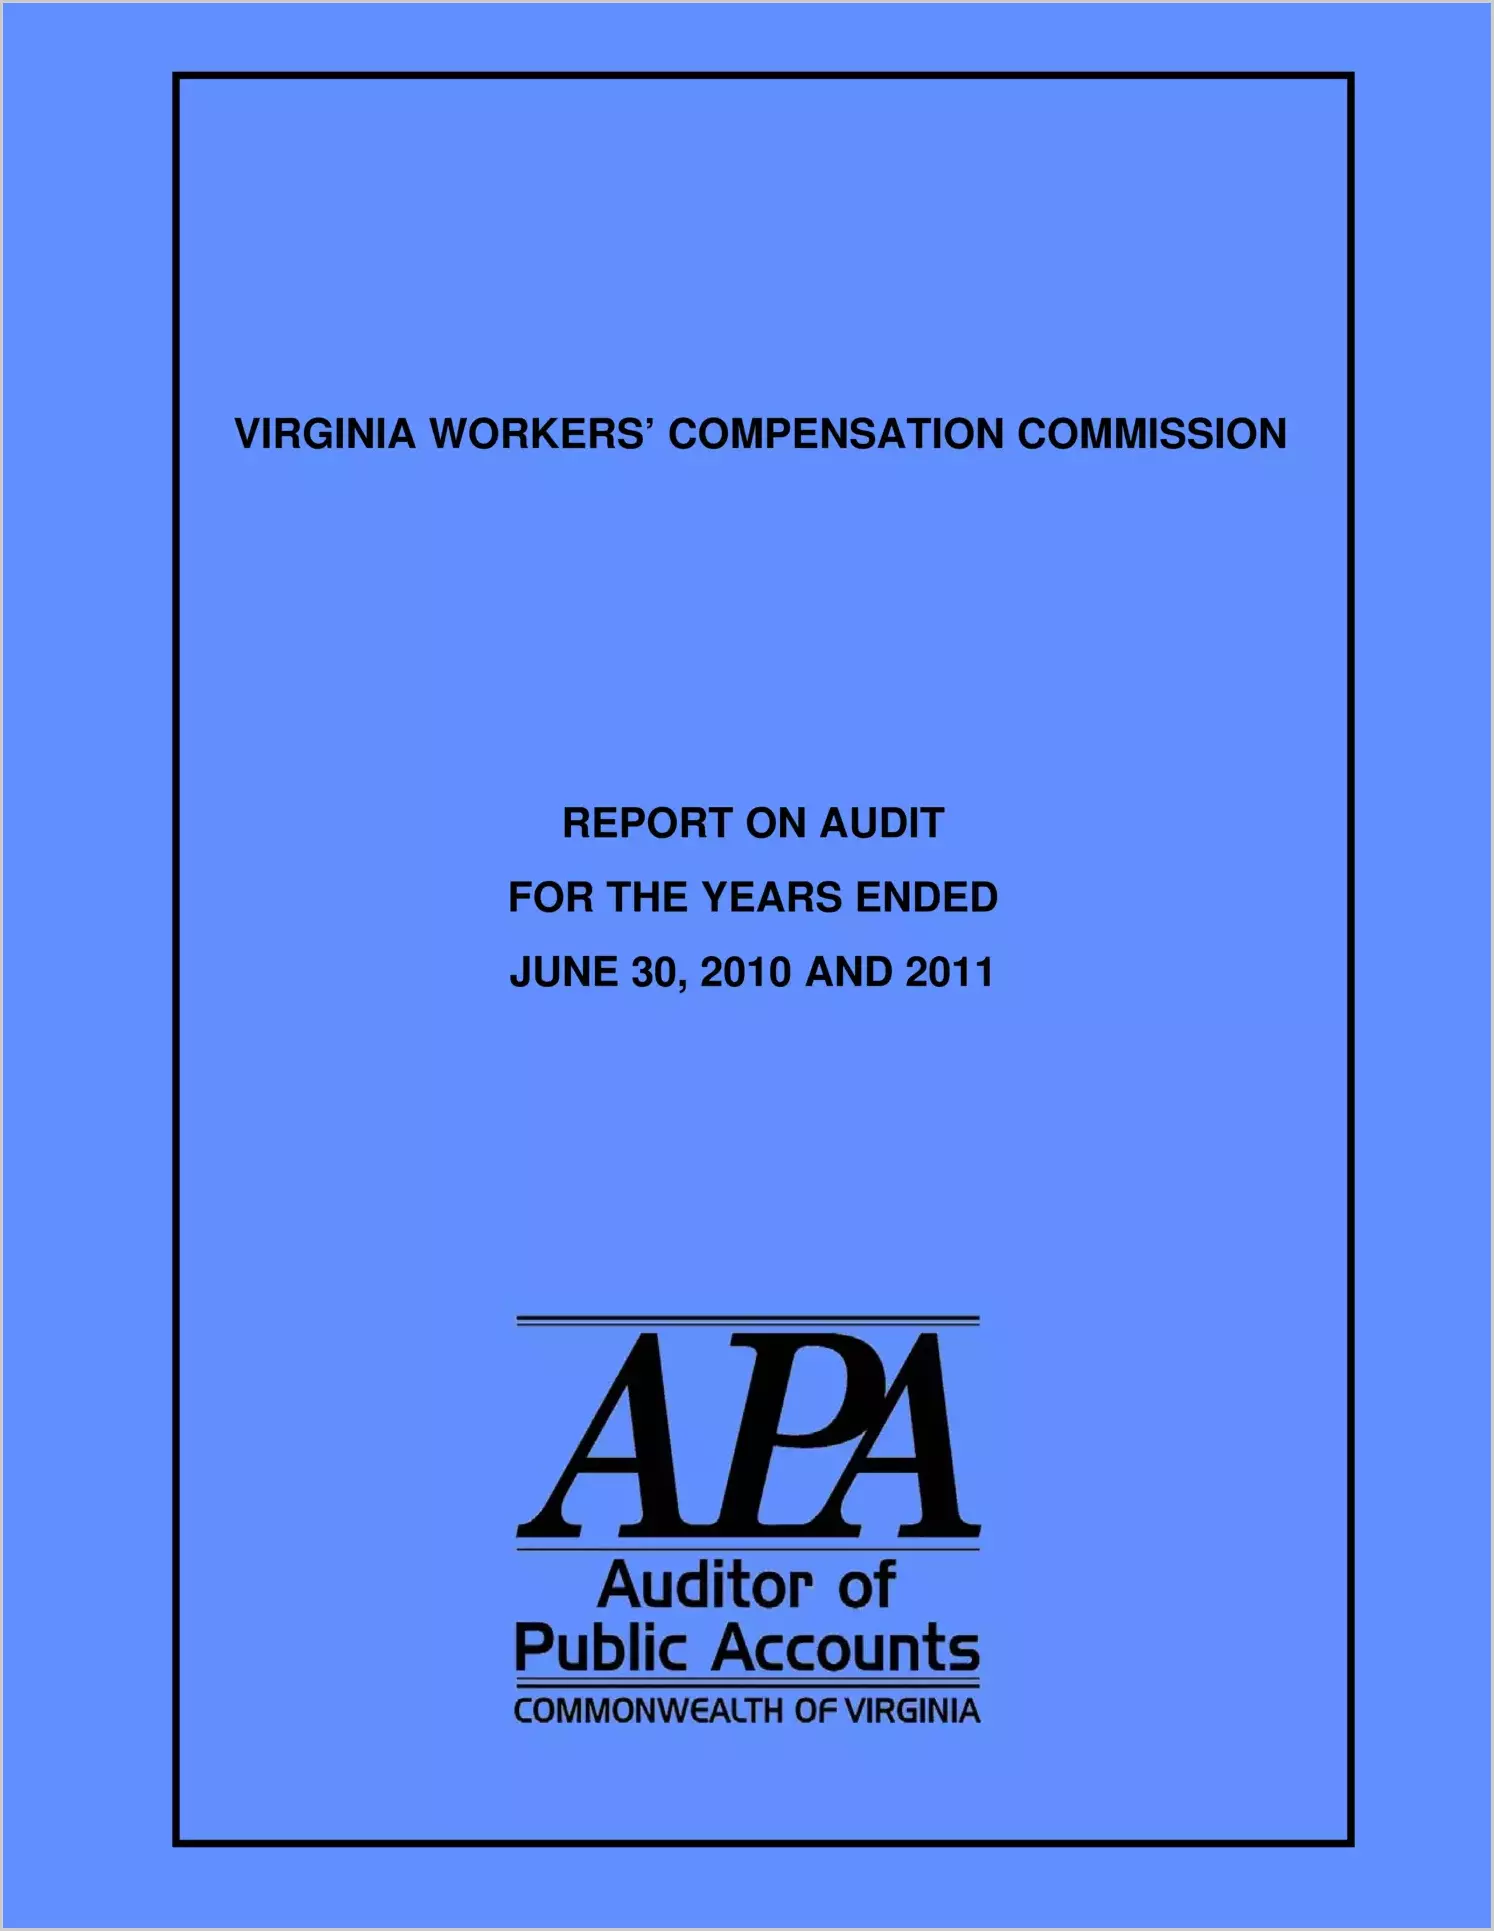 Virginia Worker's Compensation Commission for the years ended June 30, 2010 and June 30, 2011